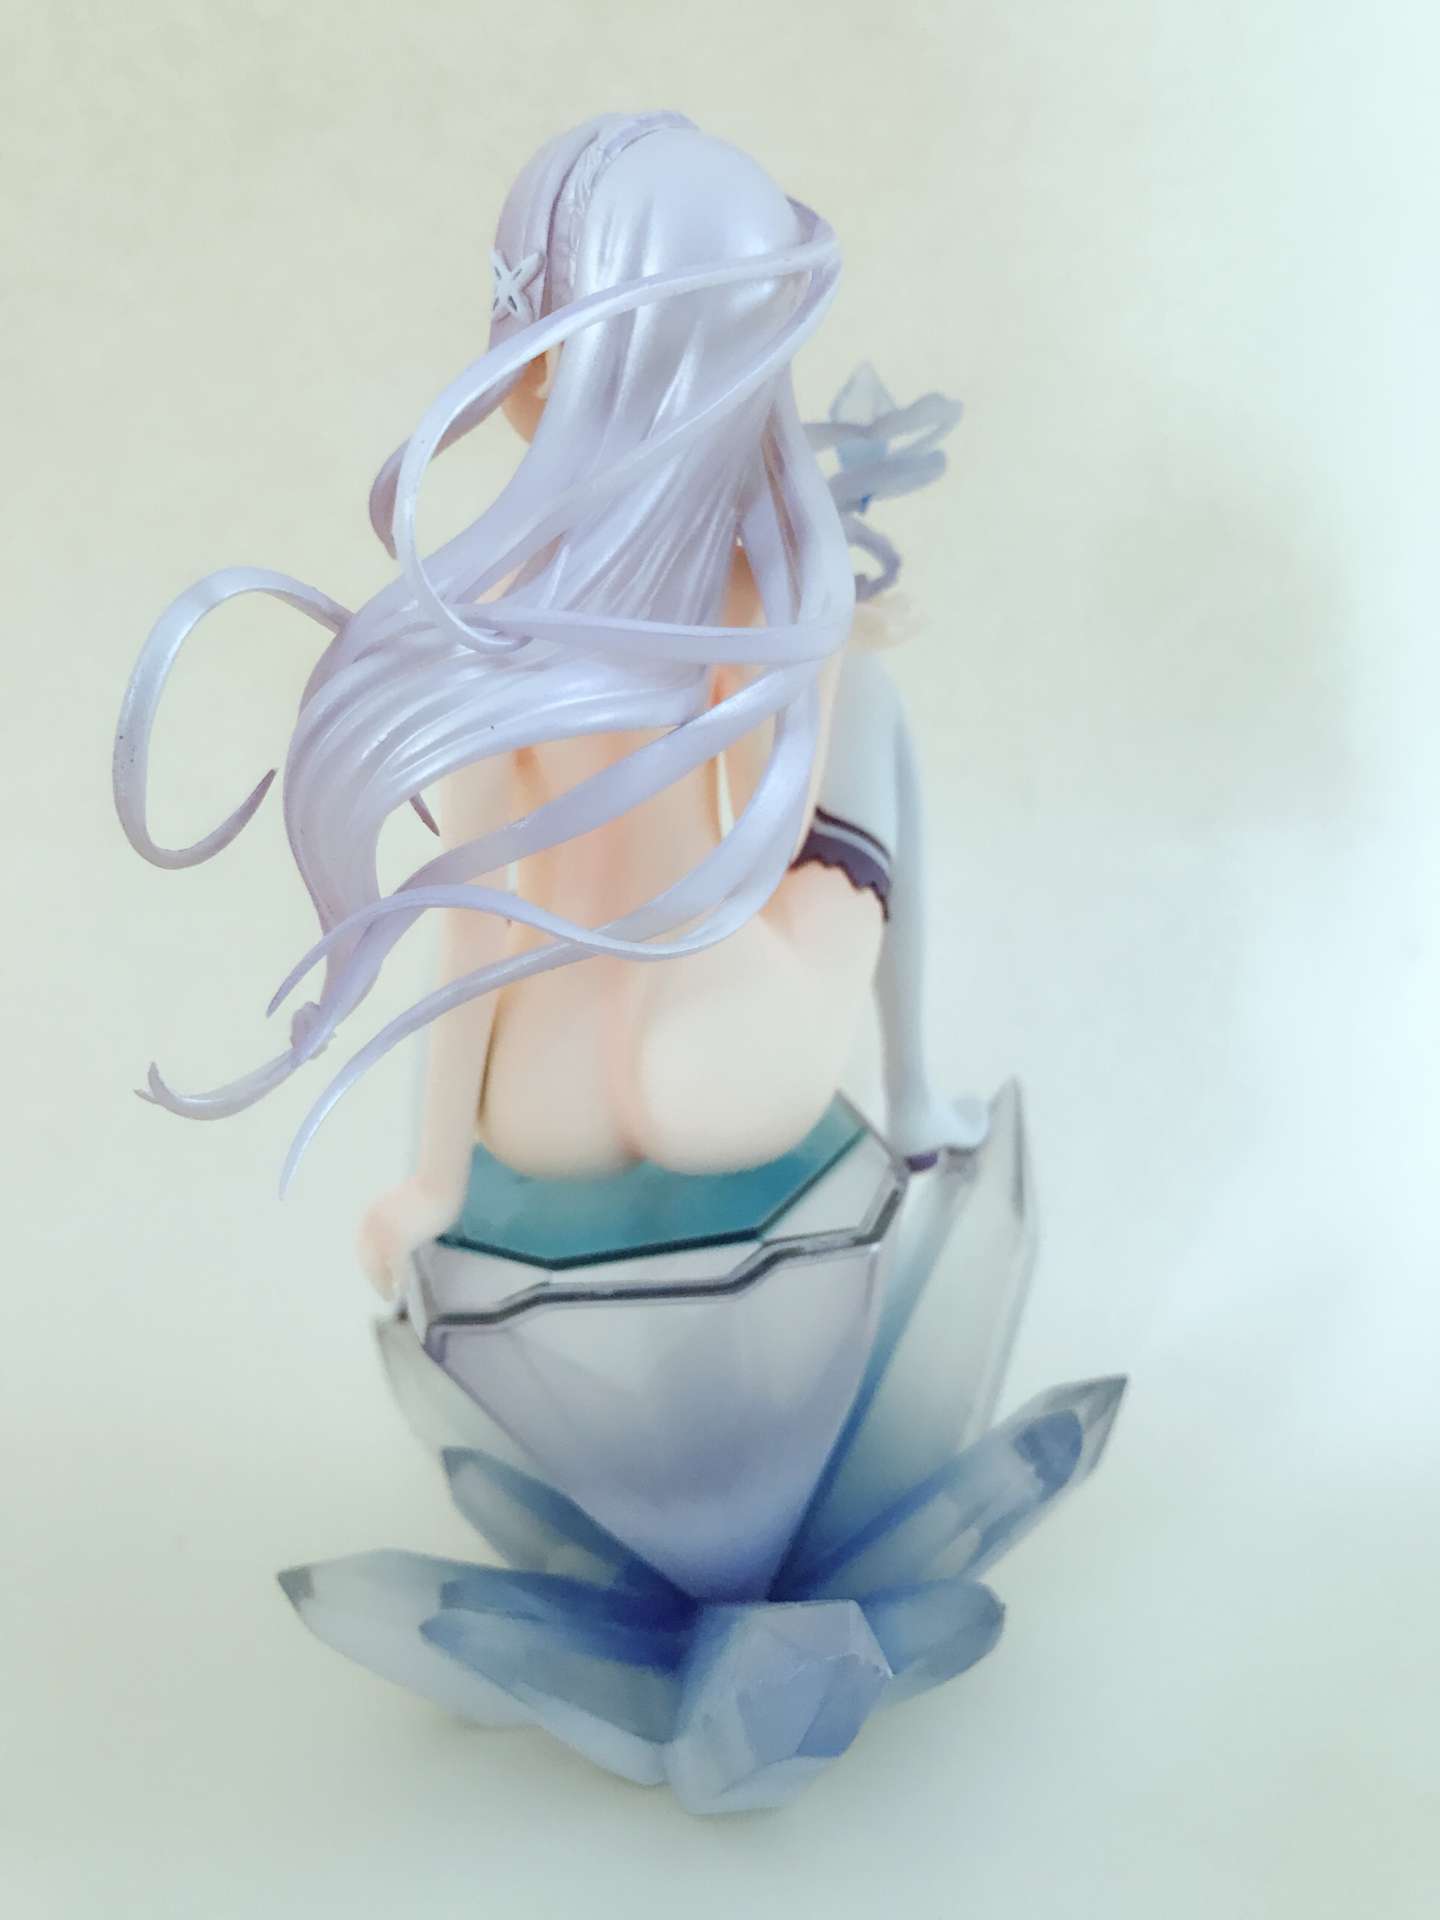 Re:Life in a different world from zero anime sexy Emilia 1/6 anime girl figure resin action figures